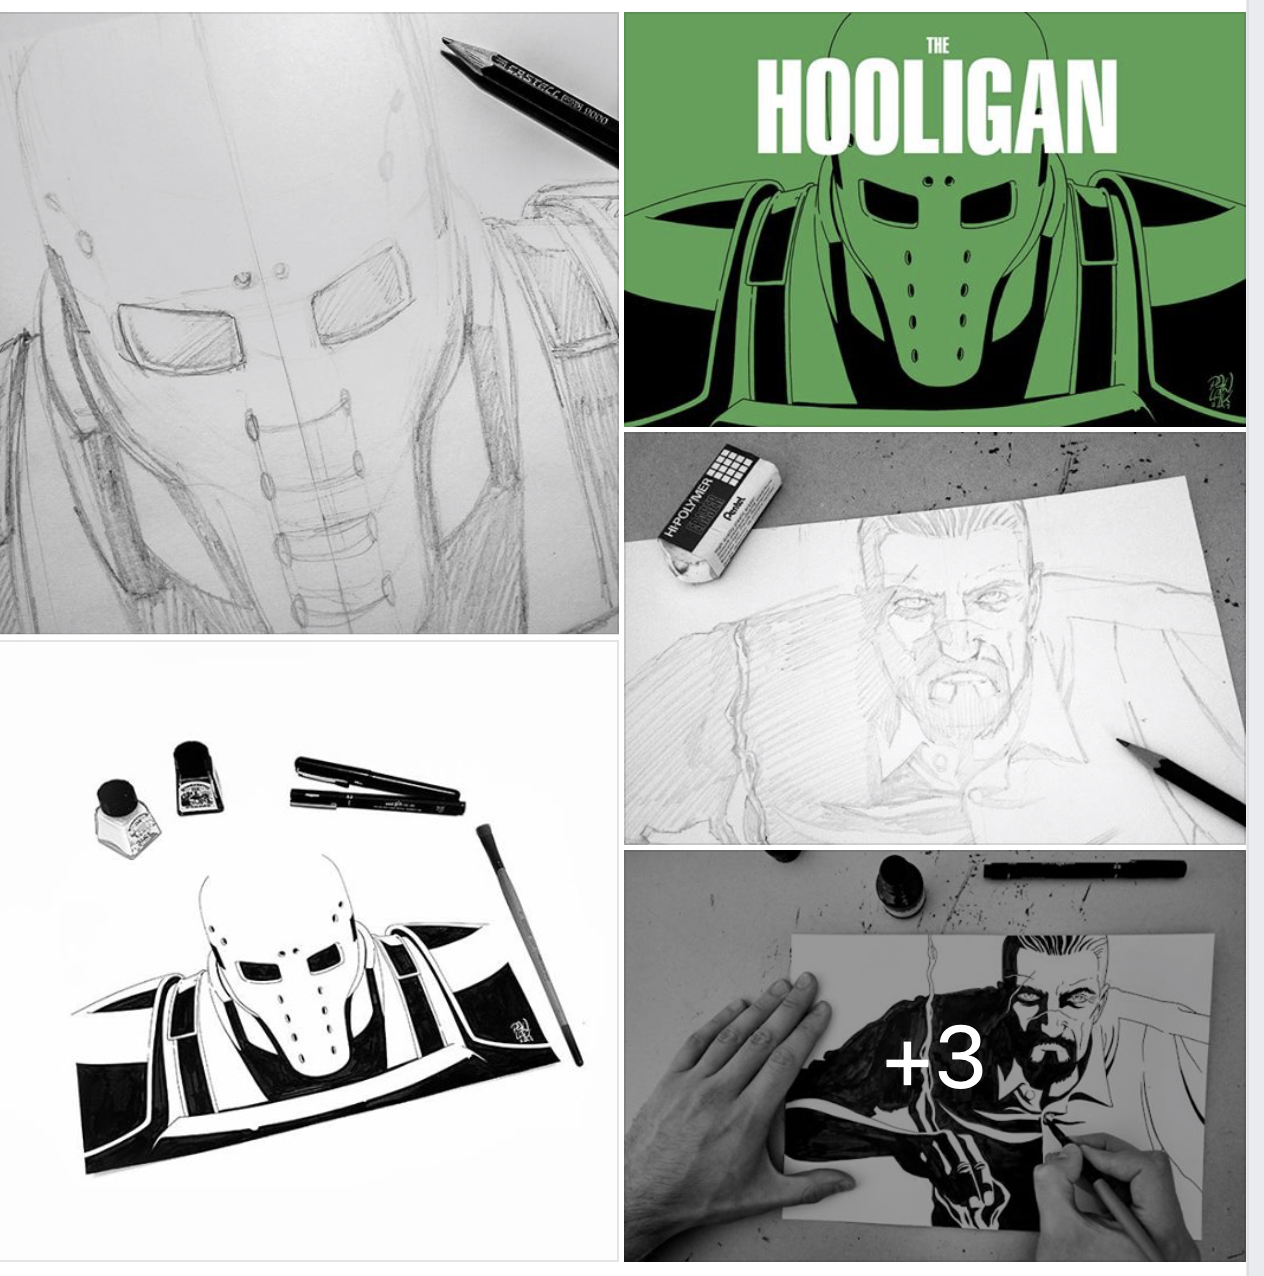 A couple of Villain WIPs by Grzegorz Pawlak. Here’s Gil Grimes and his alter ego the Hooligan.